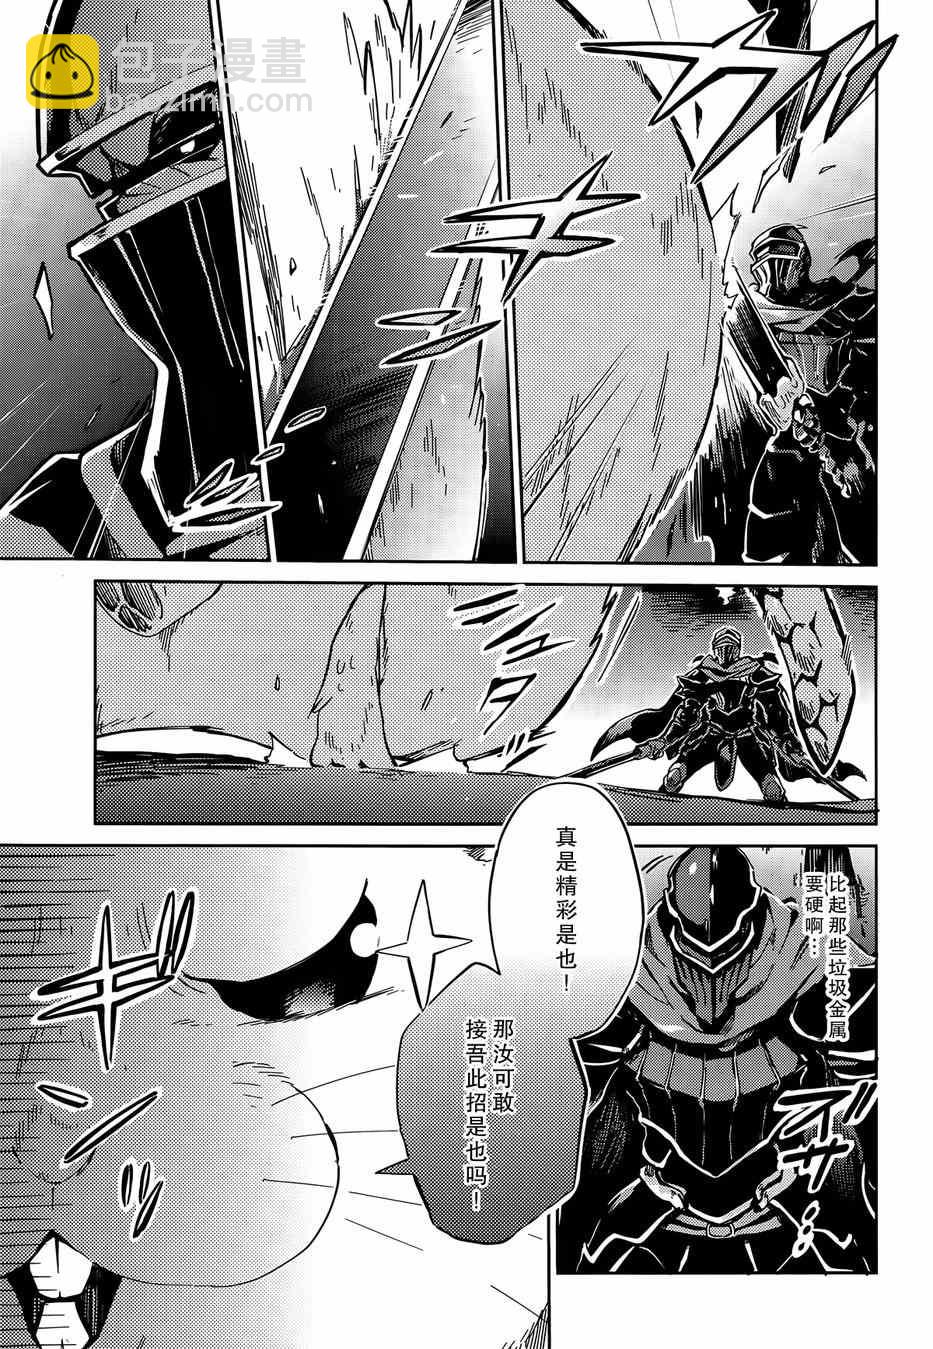 OVERLORD - 第7话 - 3